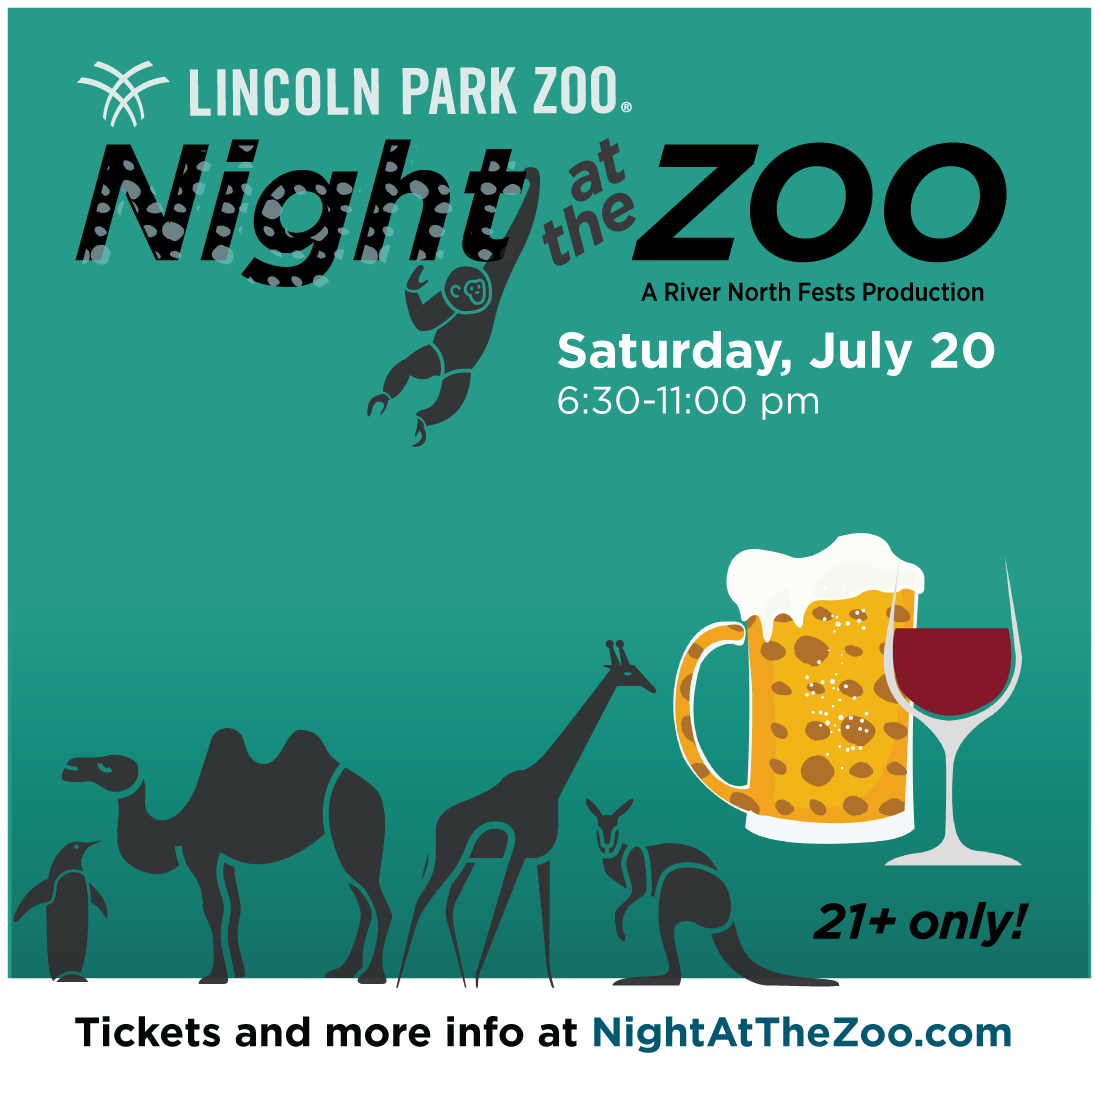 Night at the Zoo Party -  Tickets include Admission to Lincoln Park Zoo after-hours, live DJs, interactive games, giveaways & more! Plus, no kids!